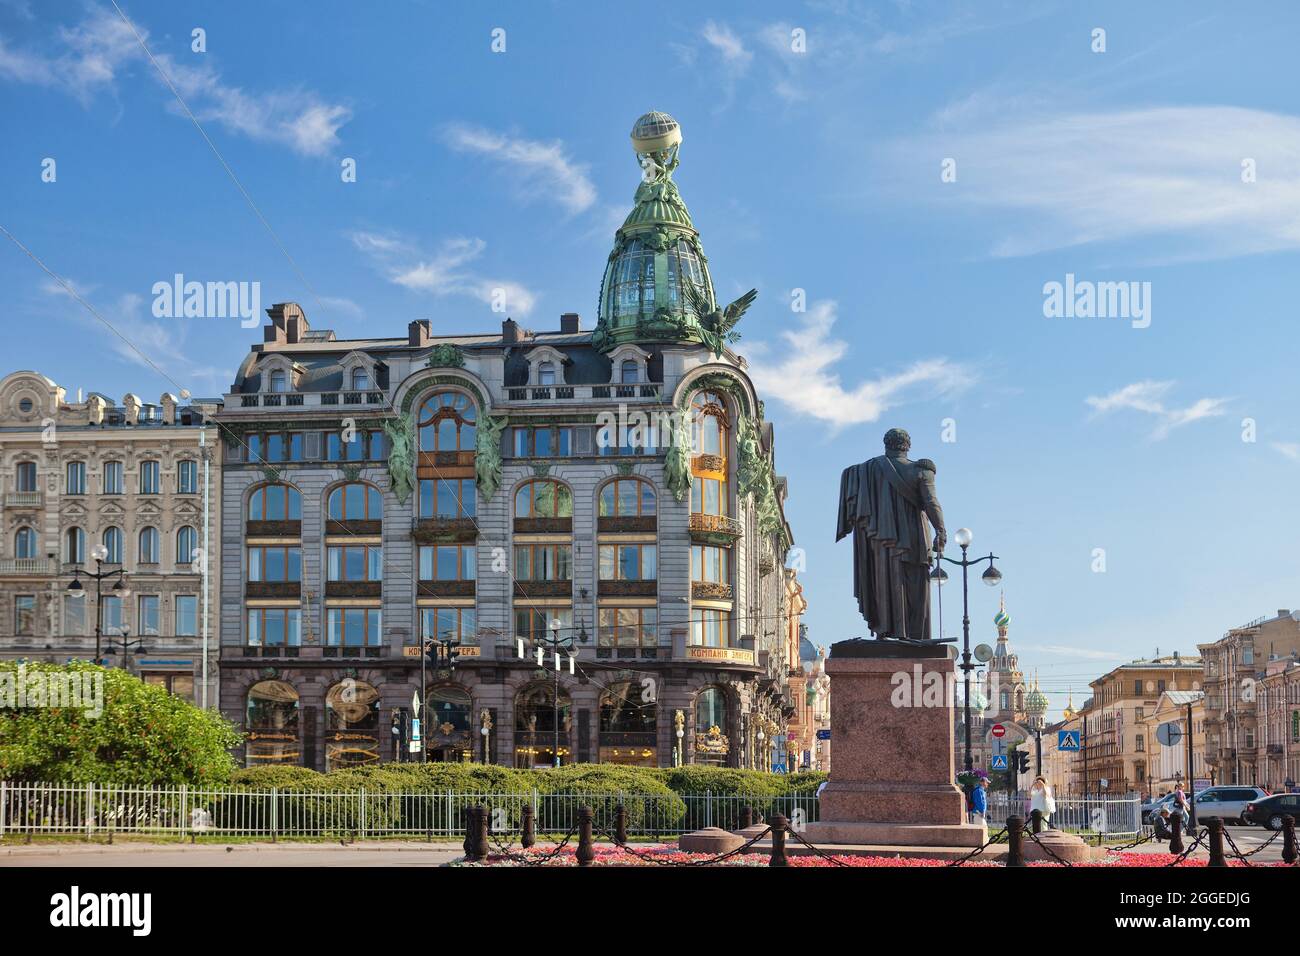 Singer house, St.Petersburg, Russia Stock Photo